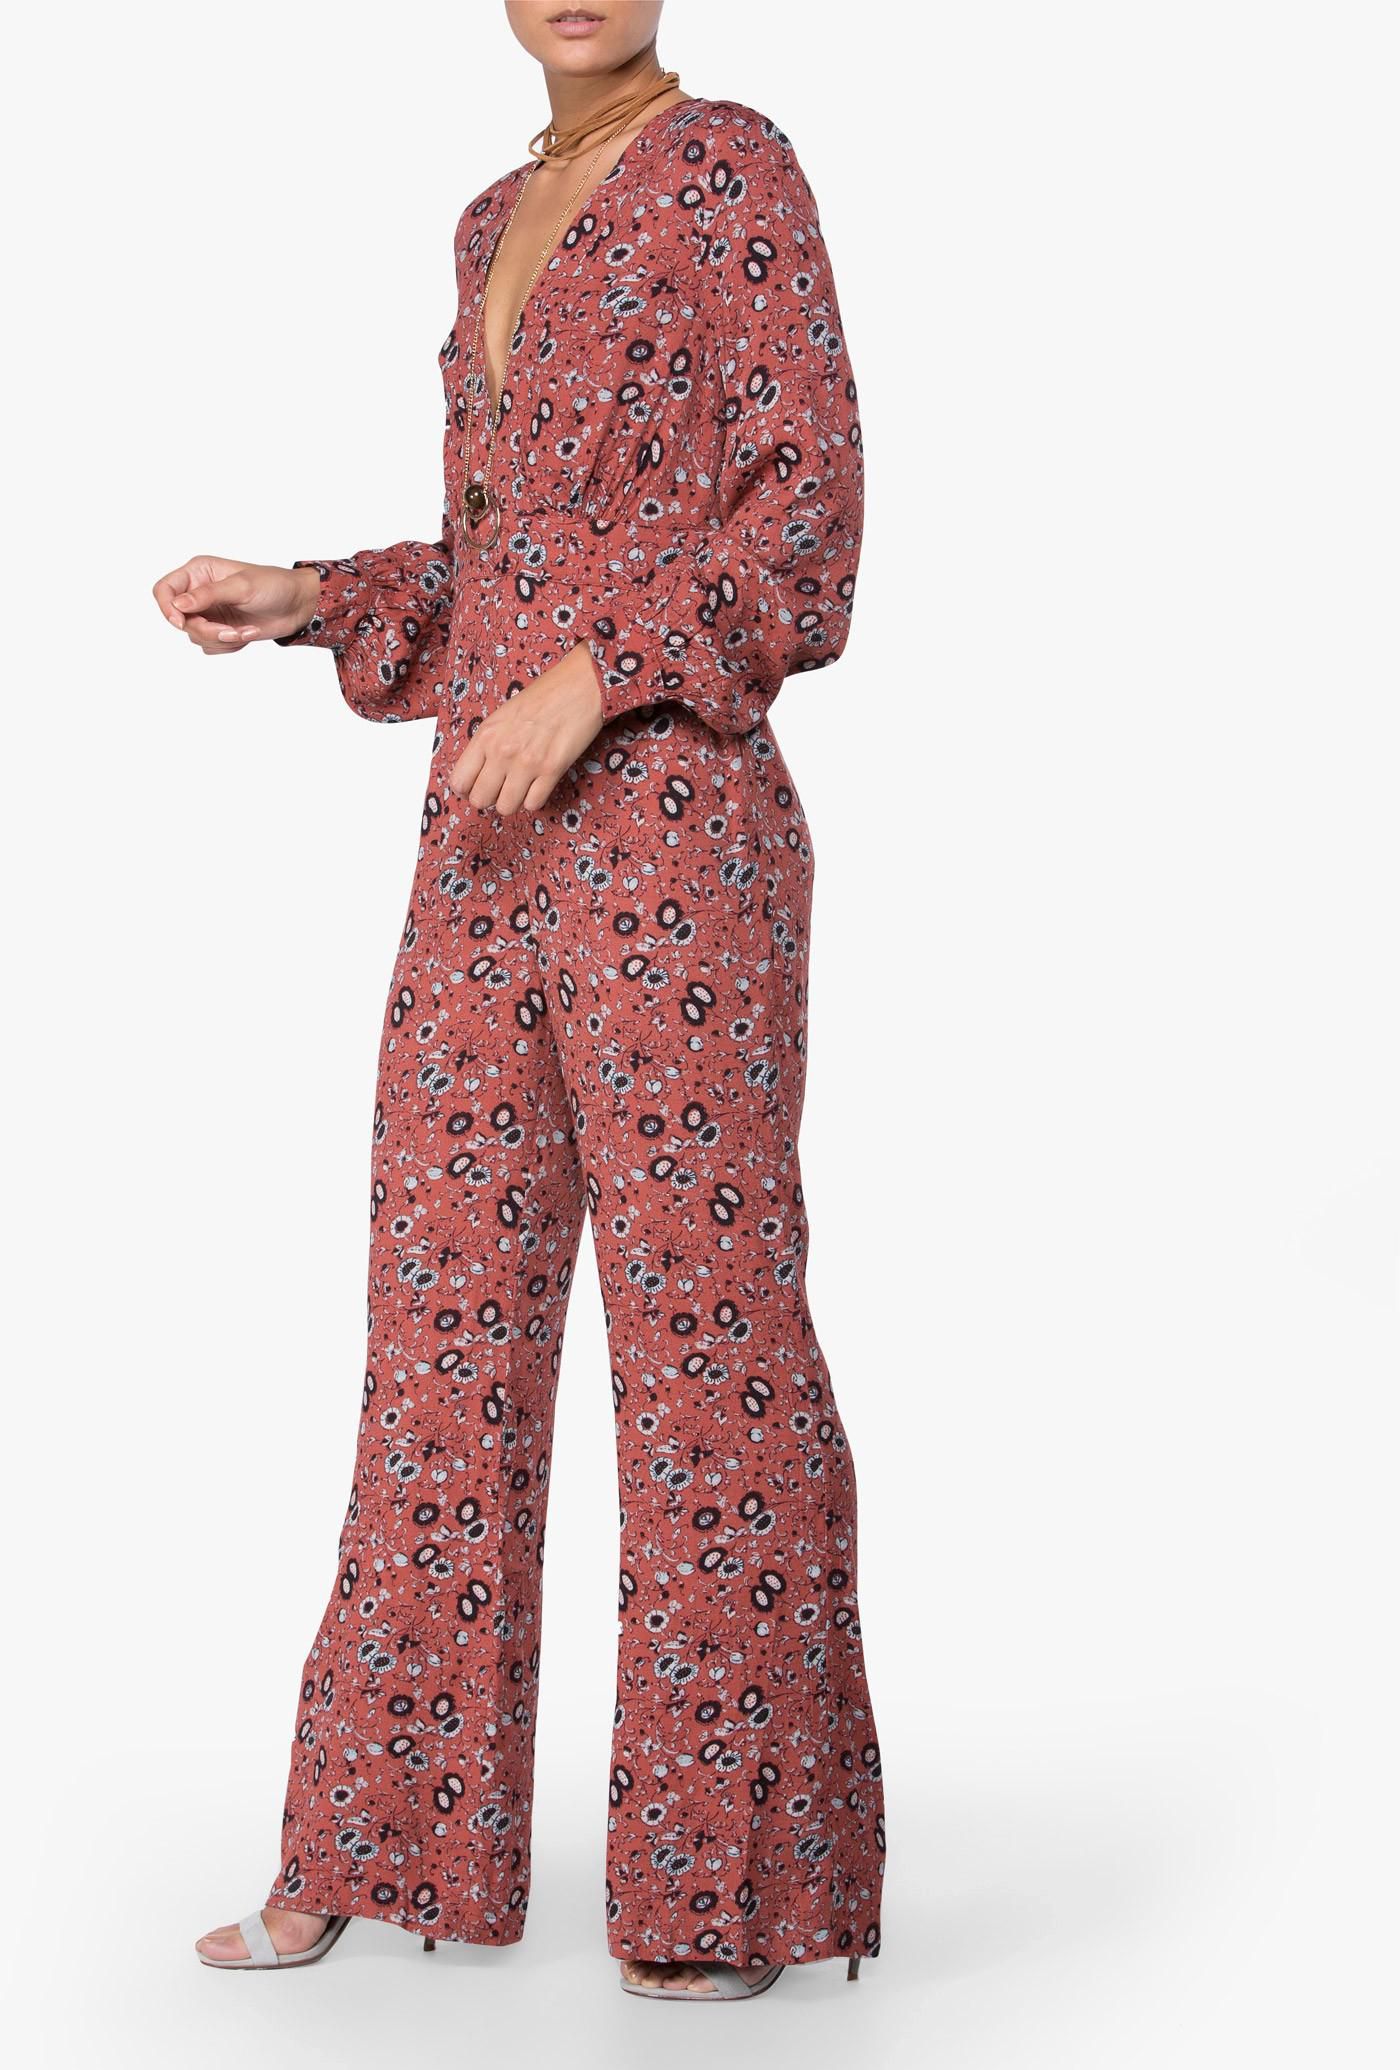 Some Like It Hot Floral Jumpsuit